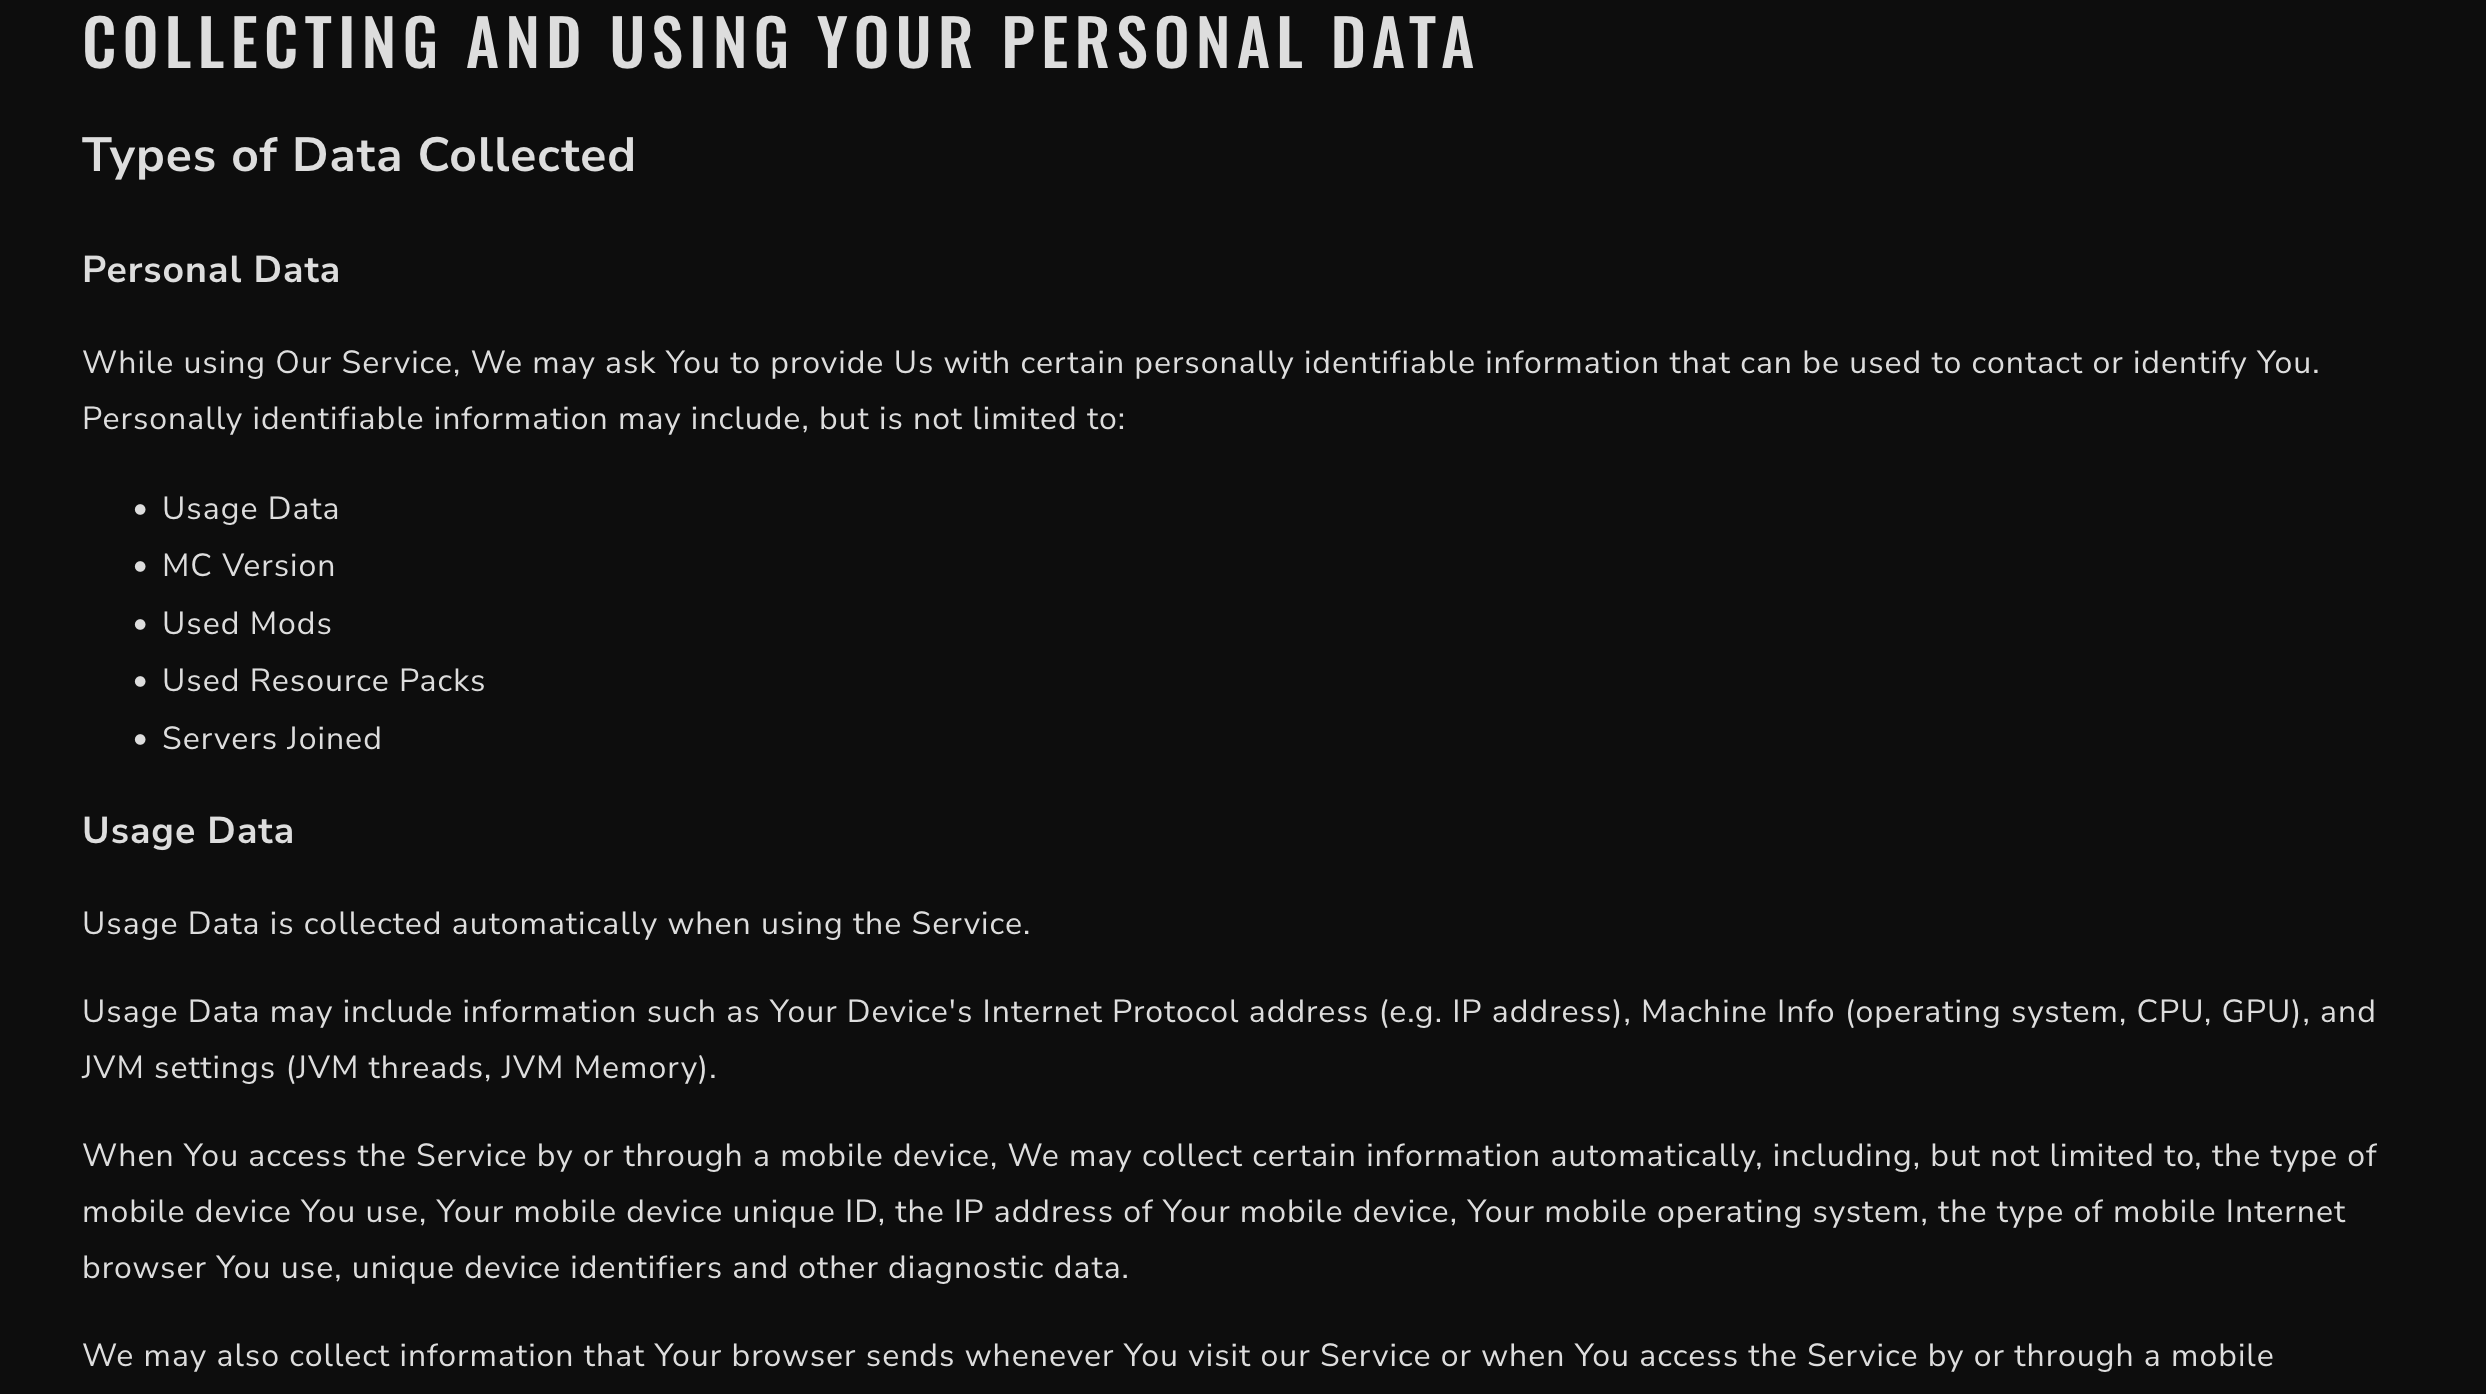 Data collection clause in https://feathermc.com/privacy/